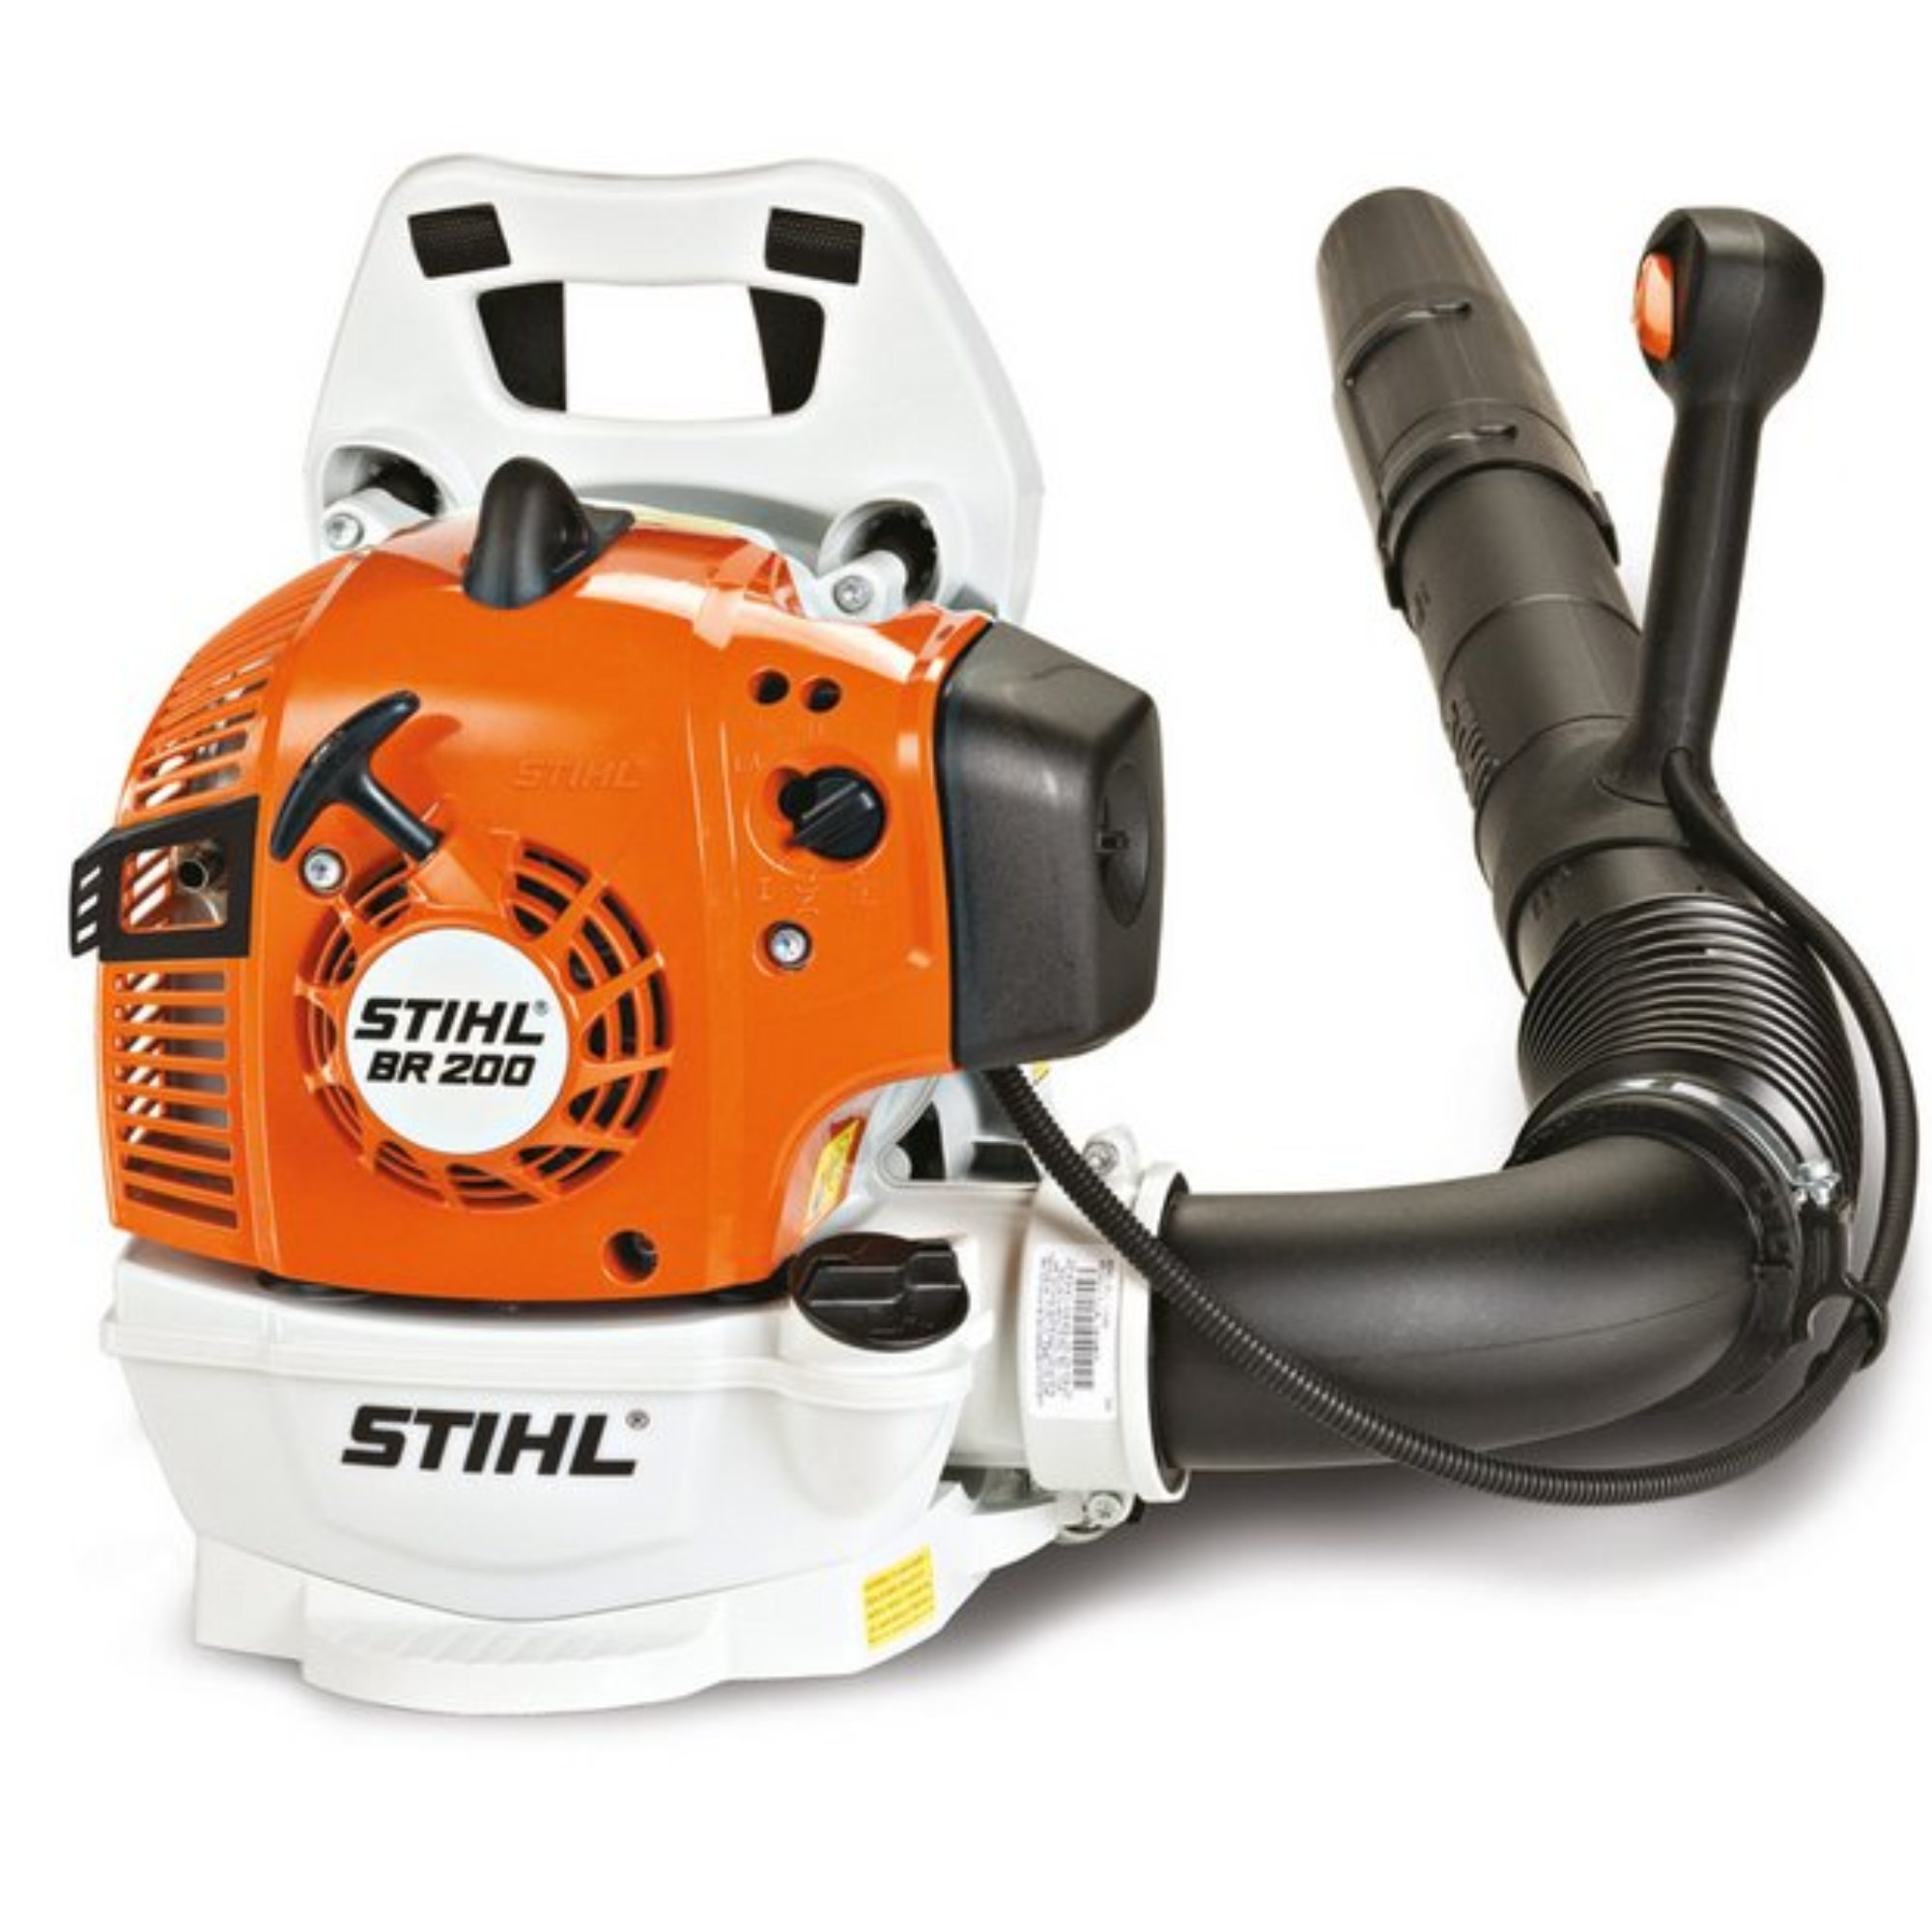 Stihl BR 200 Gas Powered Backpack Blower